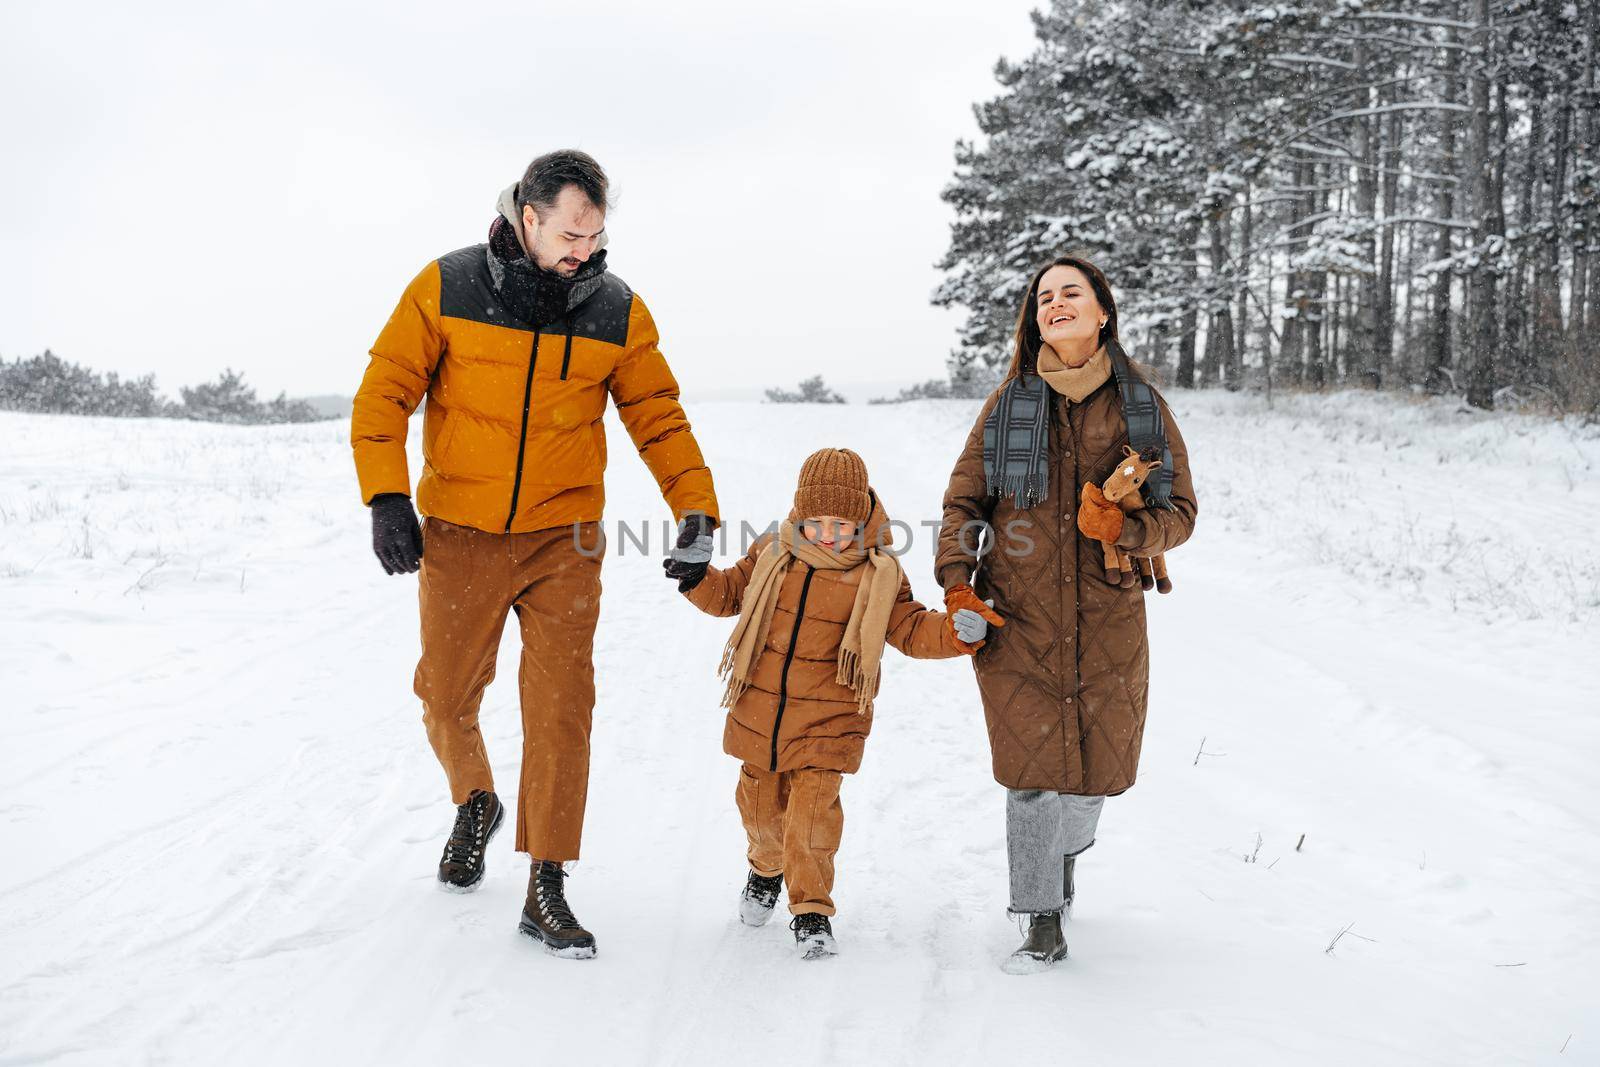 Happy family having a walk in winter outdoors in snow forest by Fabrikasimf